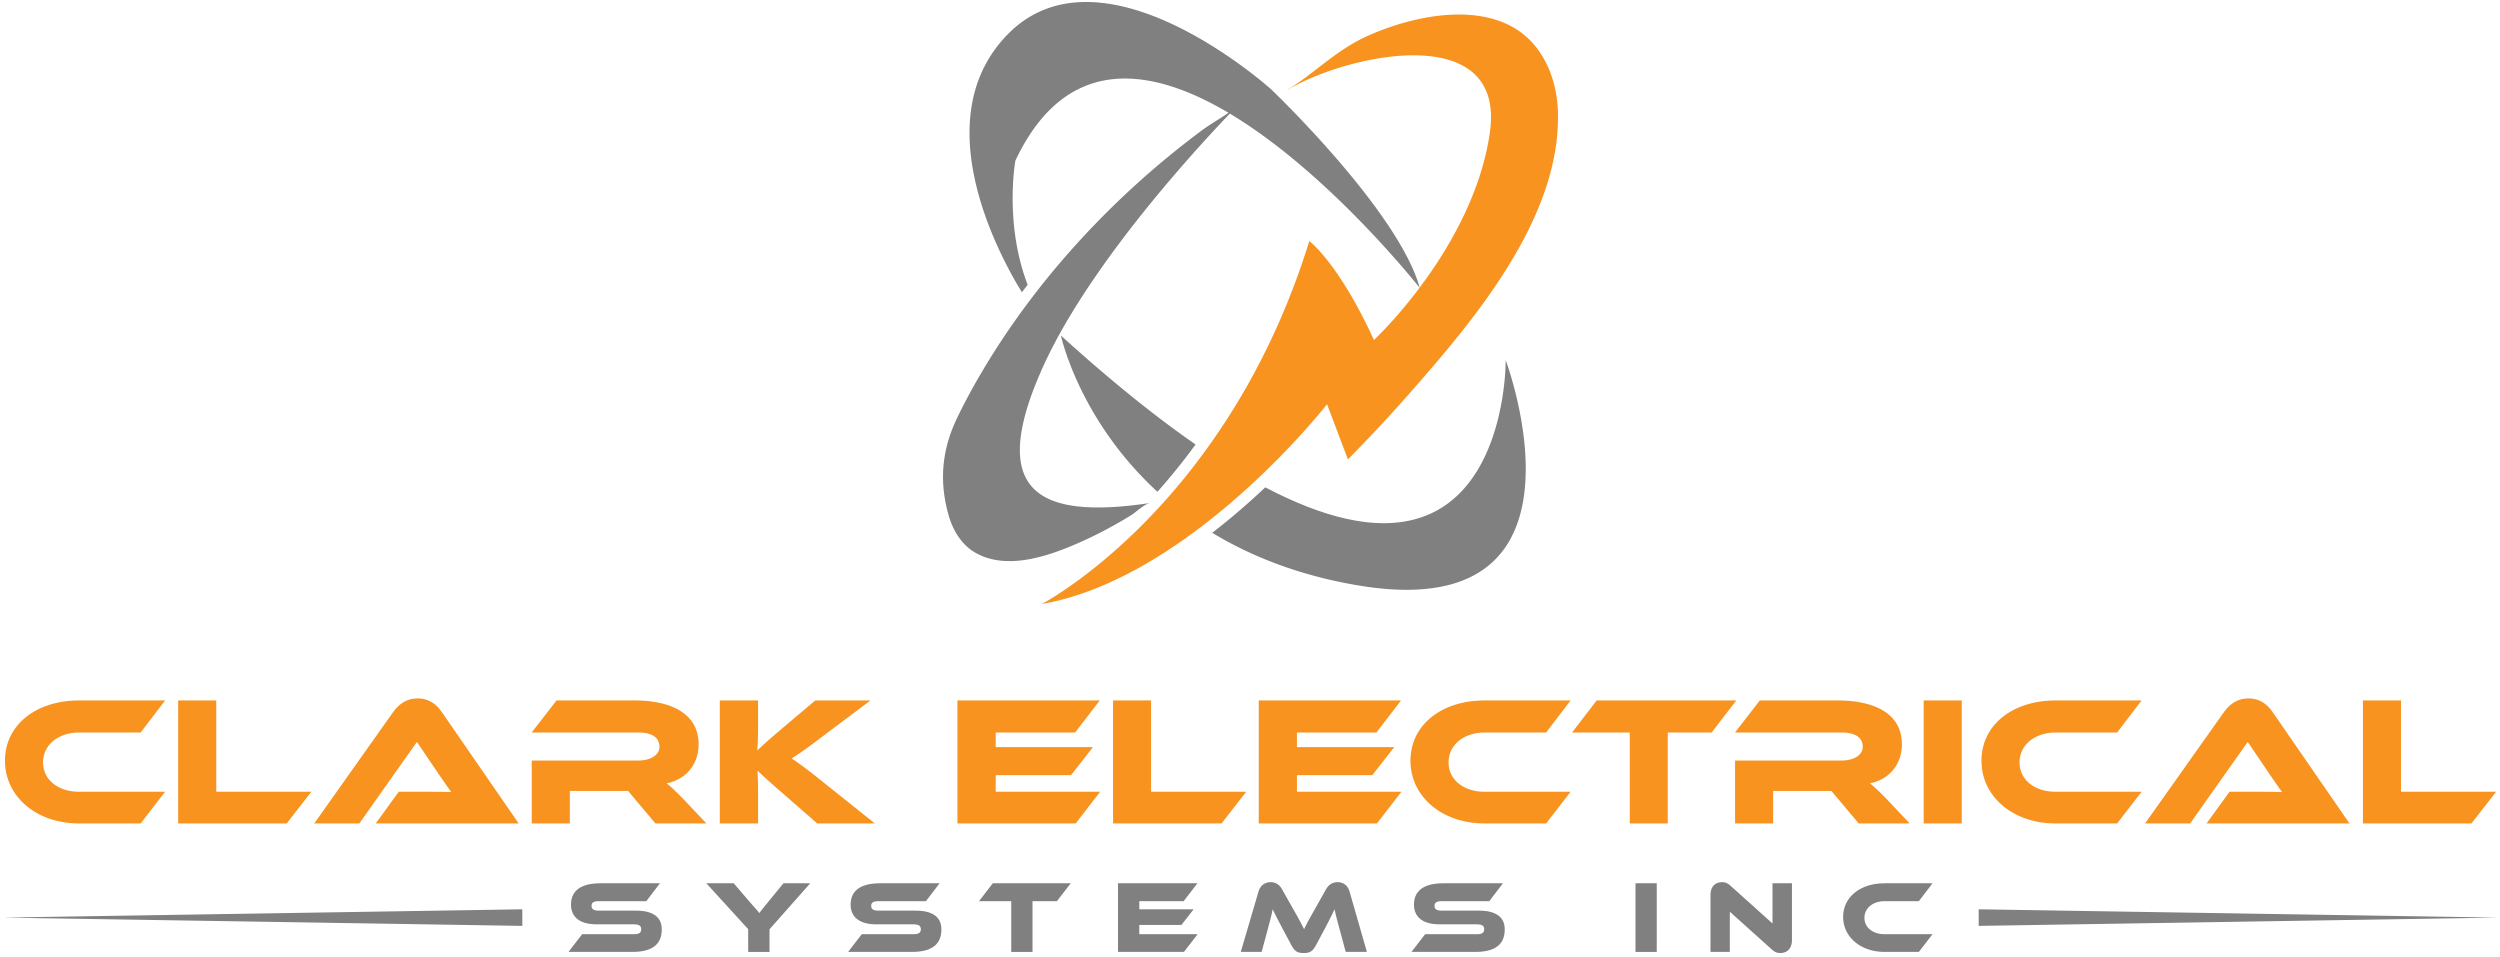 Clark Electrical Systems Inc.